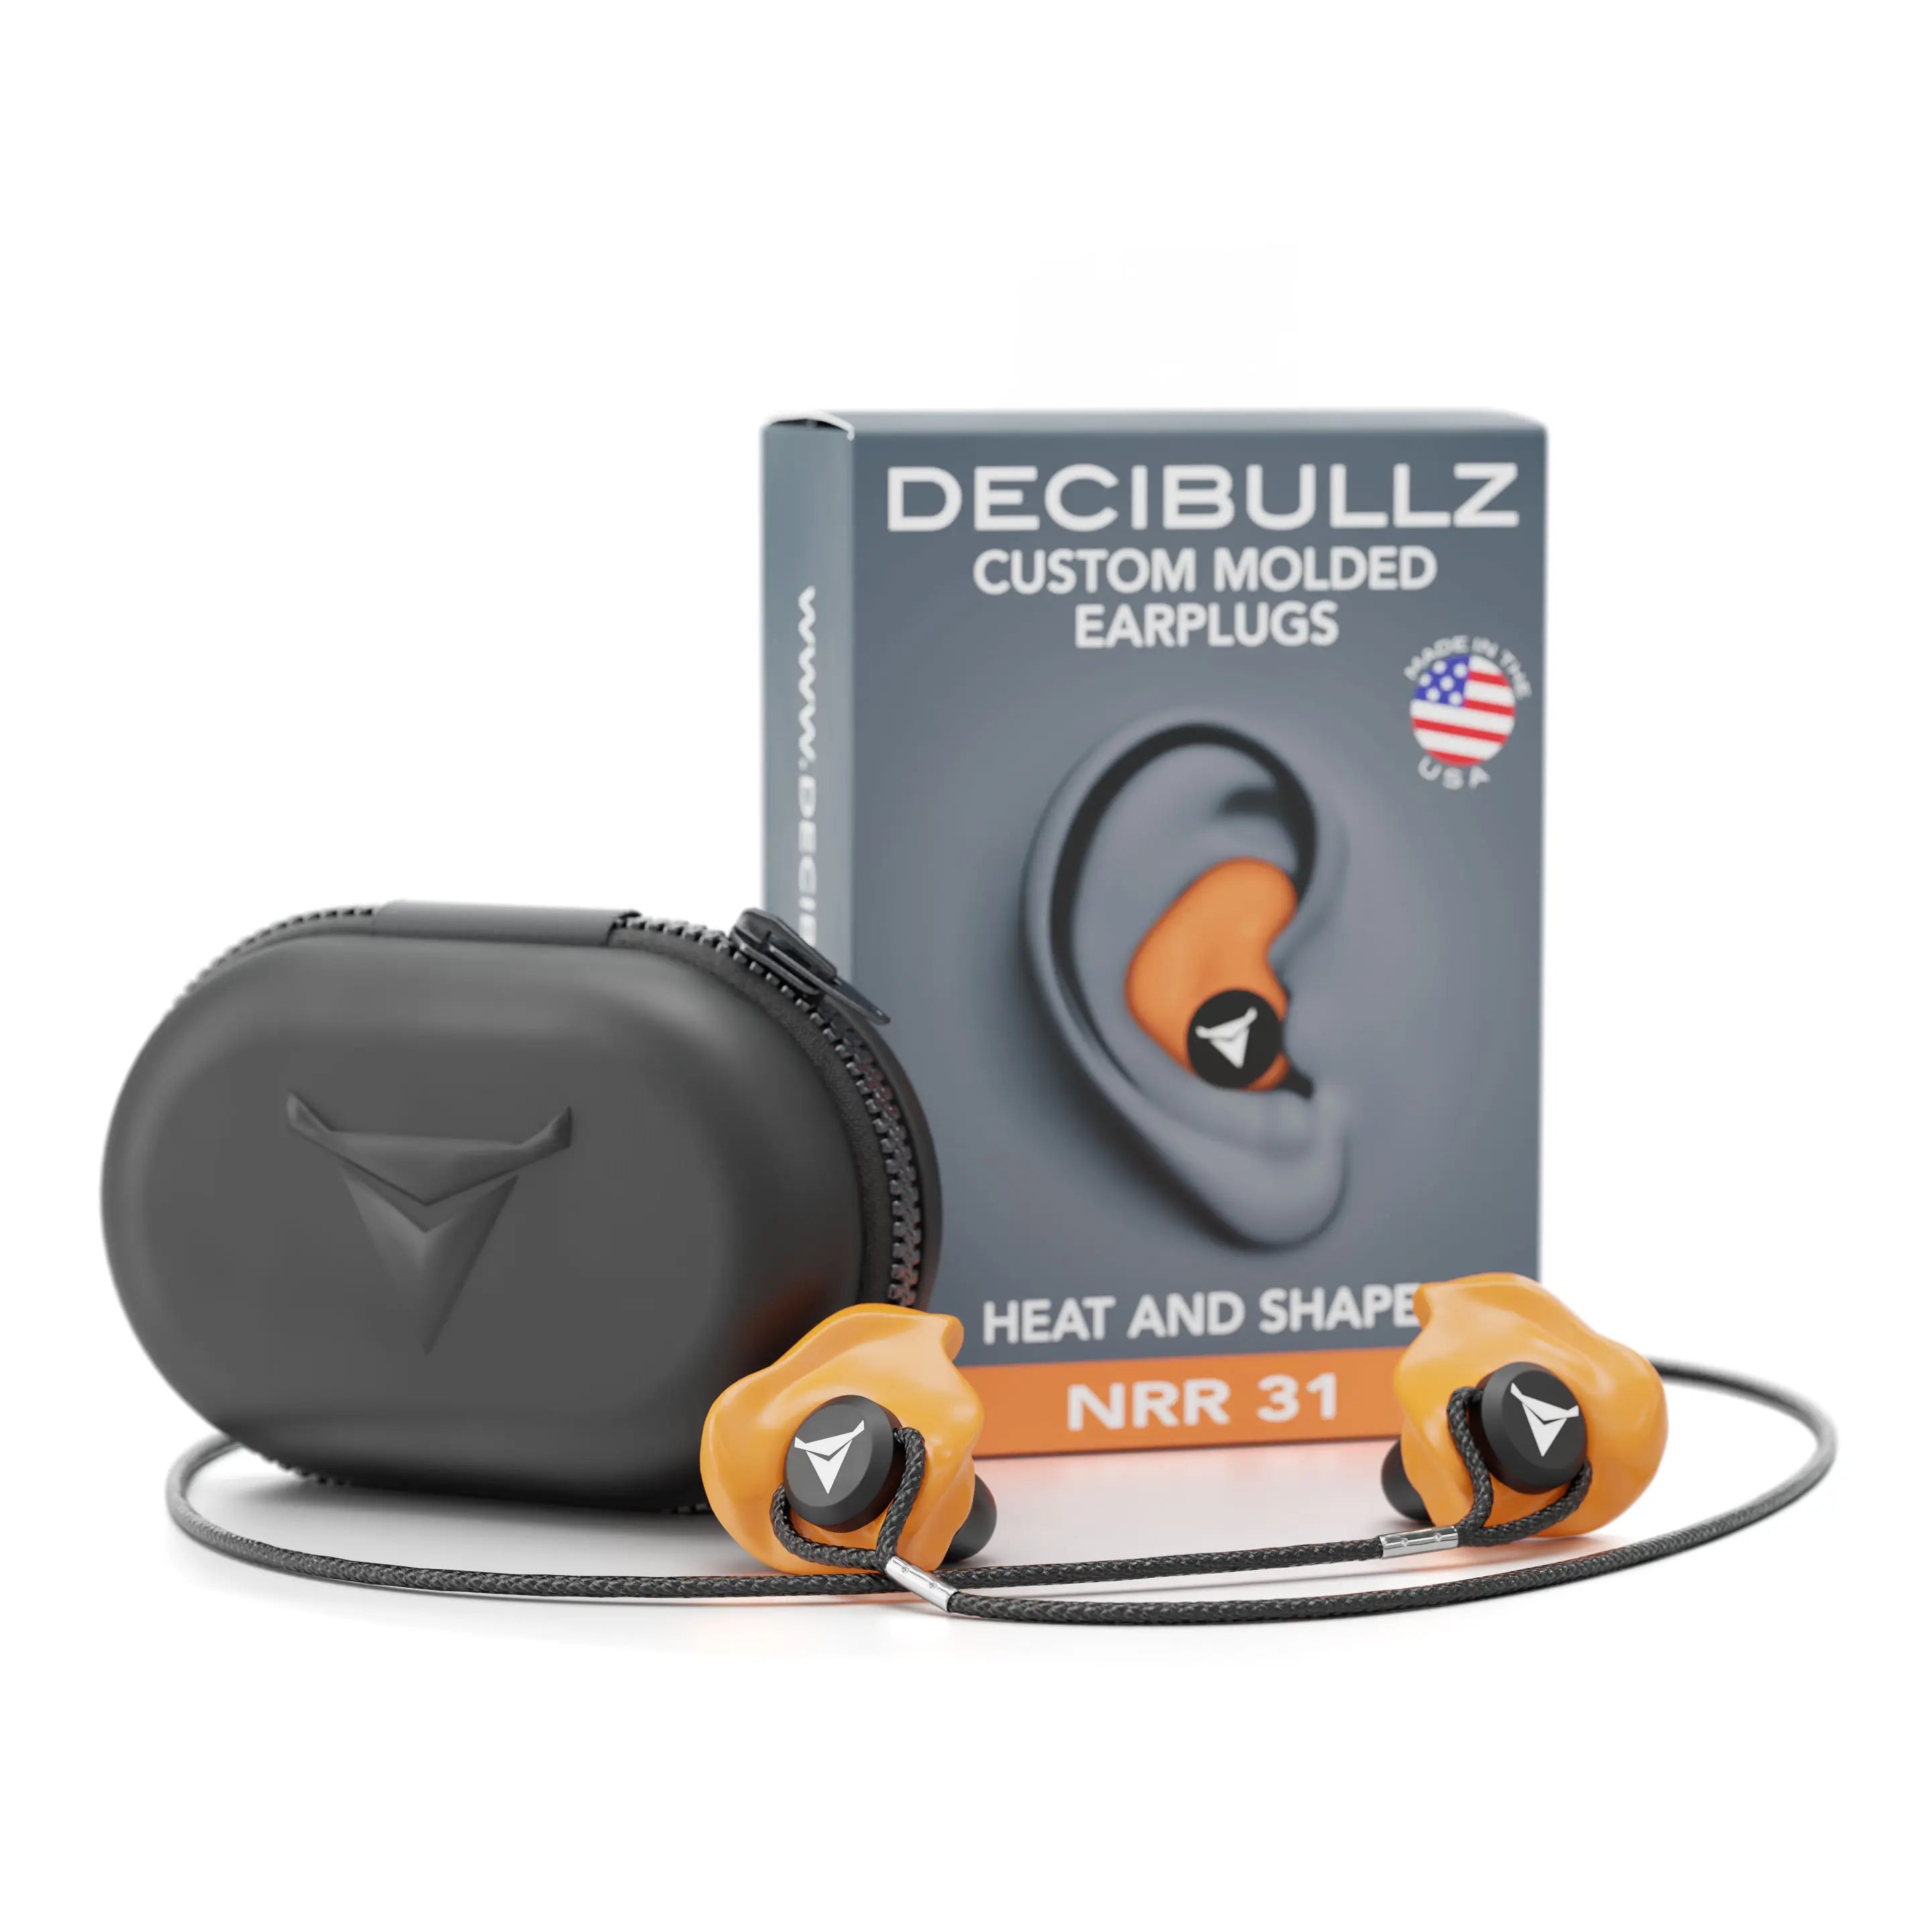 Decibullz - Custom Molded Earplugs, 31dB Highest NRR, Comfortable Hearing  Protection for Shooting, Travel, Swimming, Work and Concerts (Orange)